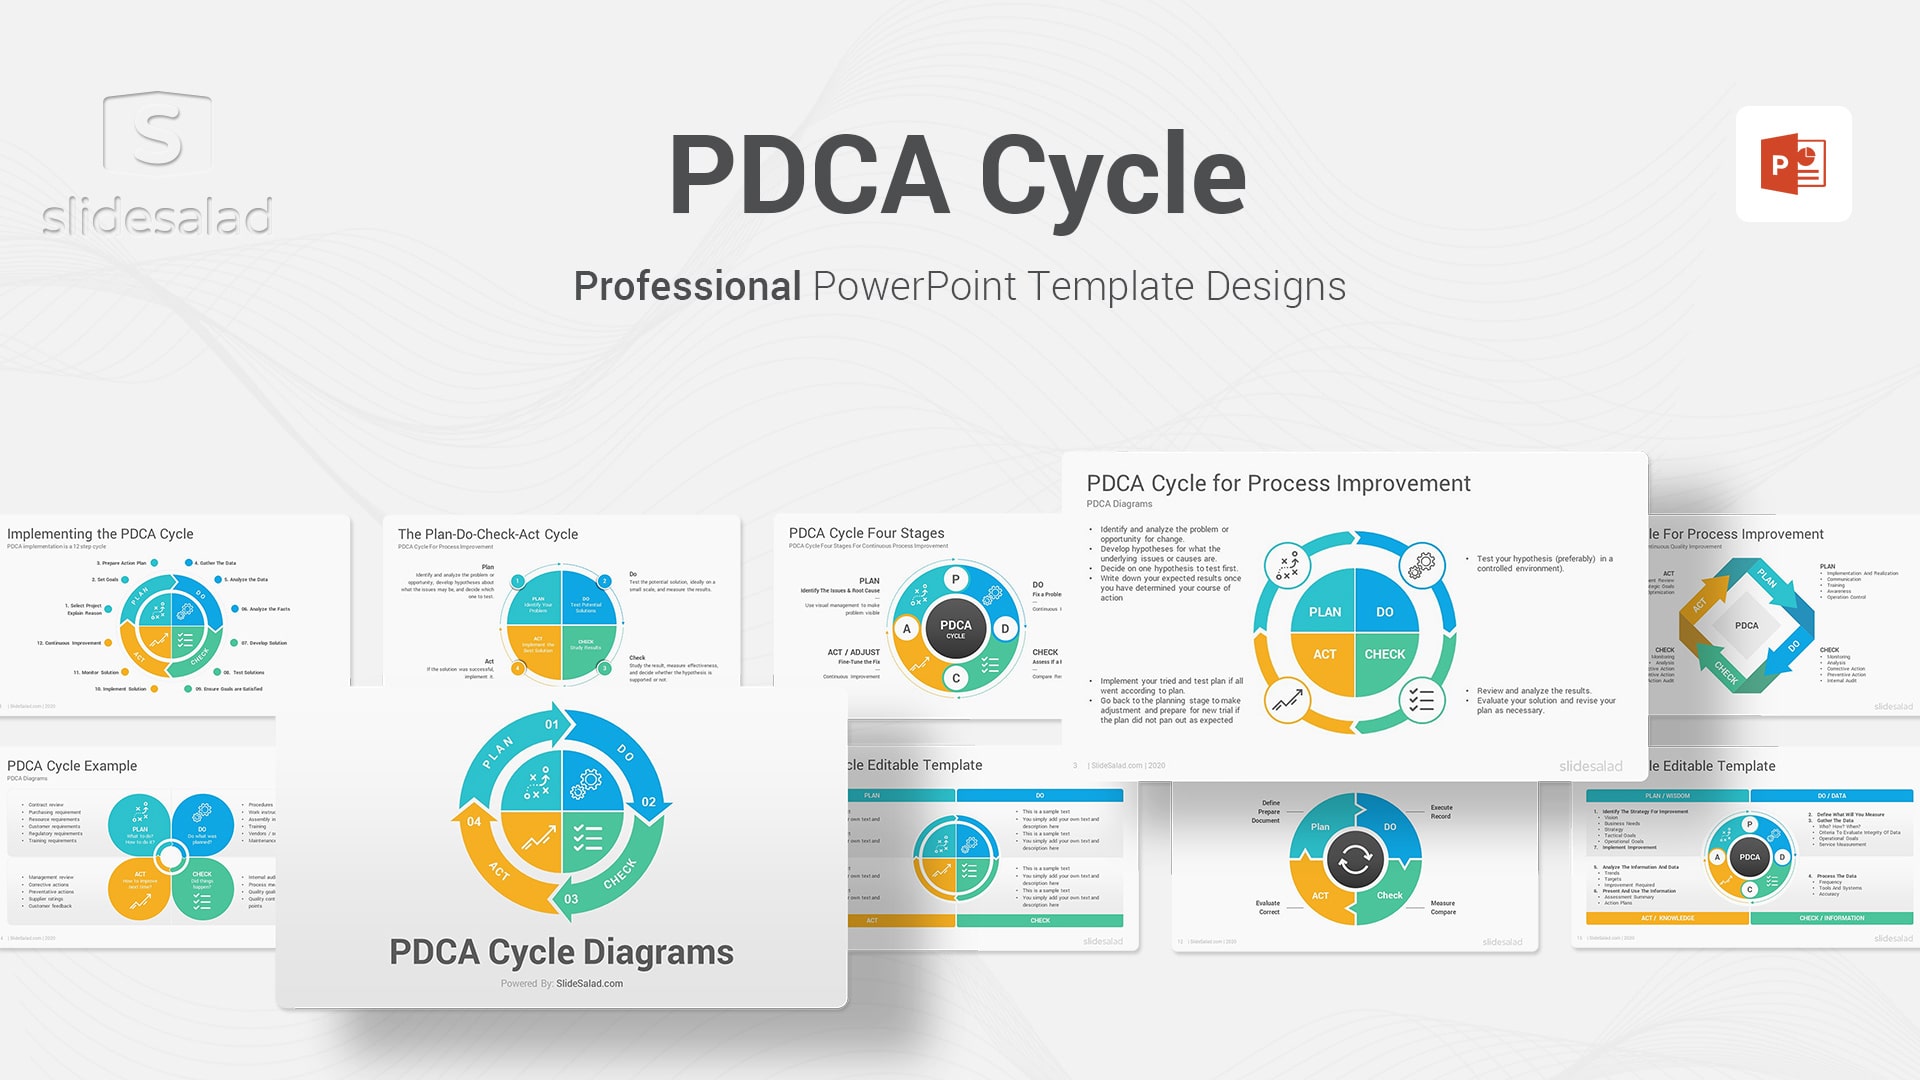 PDCA Cycle Diagrams PowerPoint Template - Best PDCA Cycle Diagram Illustrations in PowerPoint